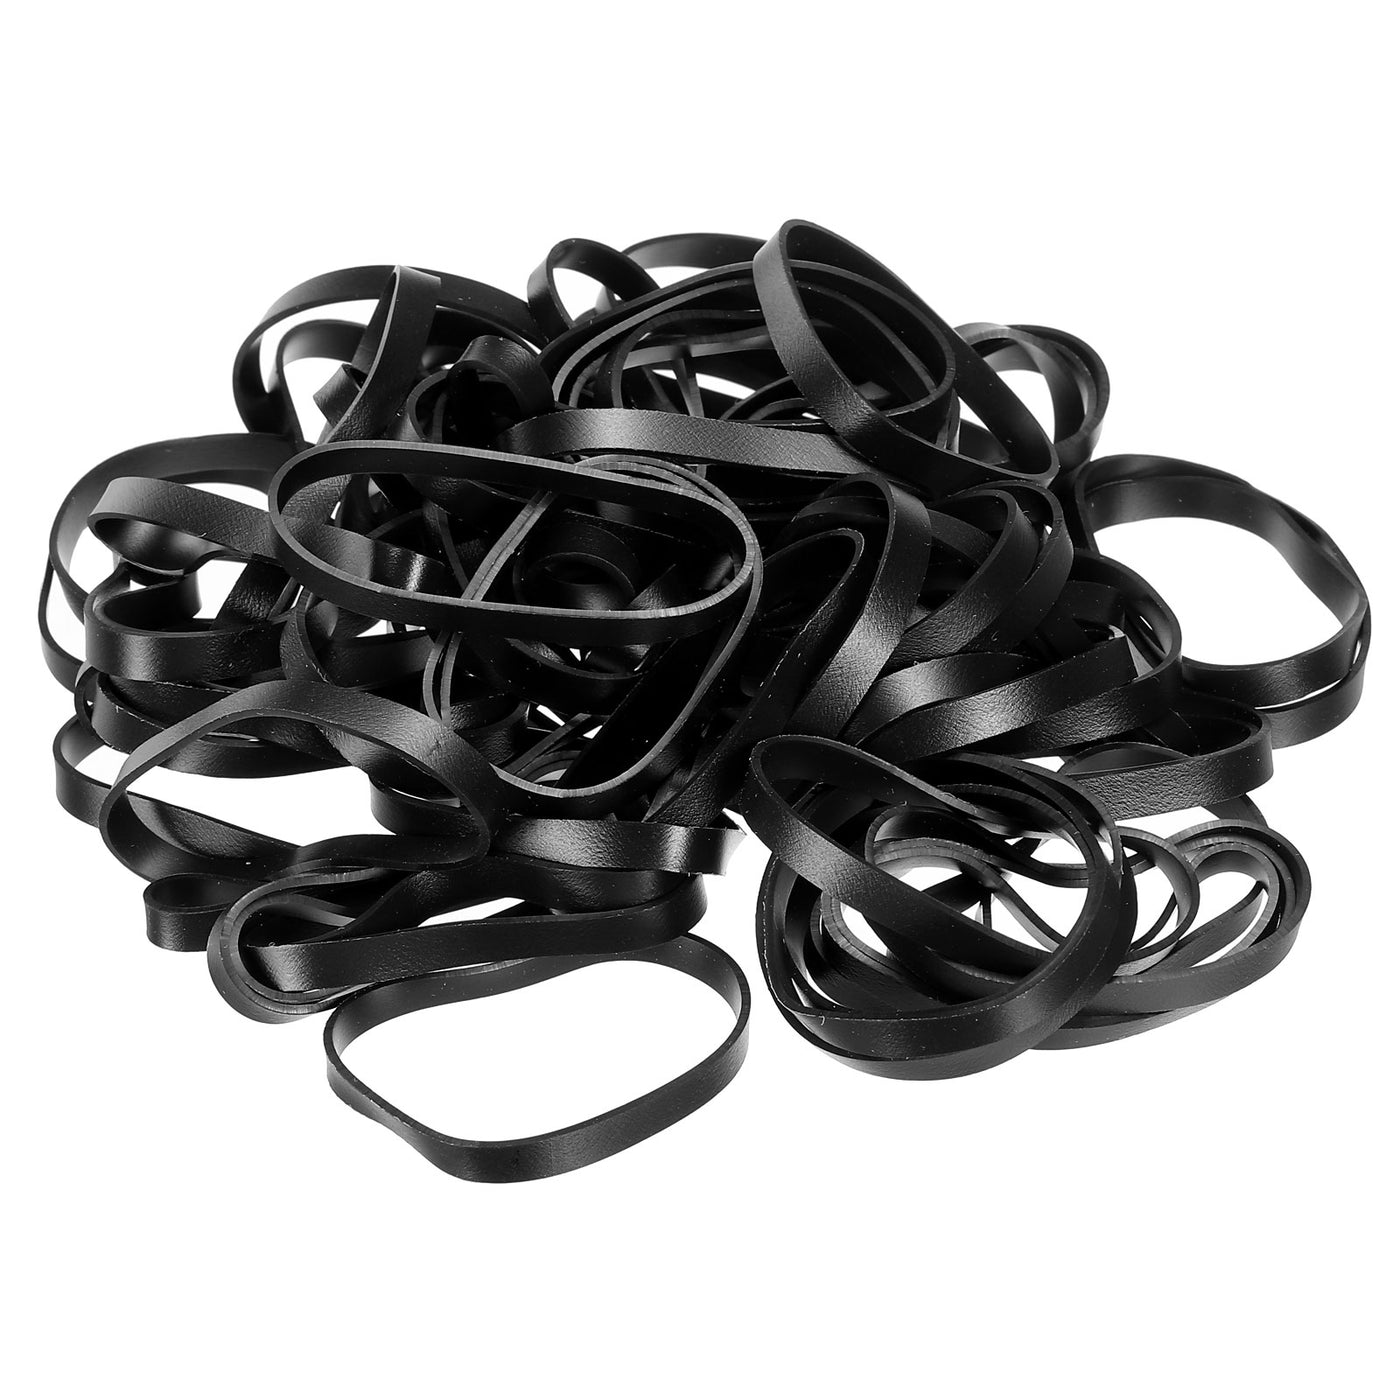 Harfington Silicone Rubber Bands Rings 50pcs Non-slip 2.2" Flat Black for Books, Art, Boxes, Cord Wrapping, Bag Wraps